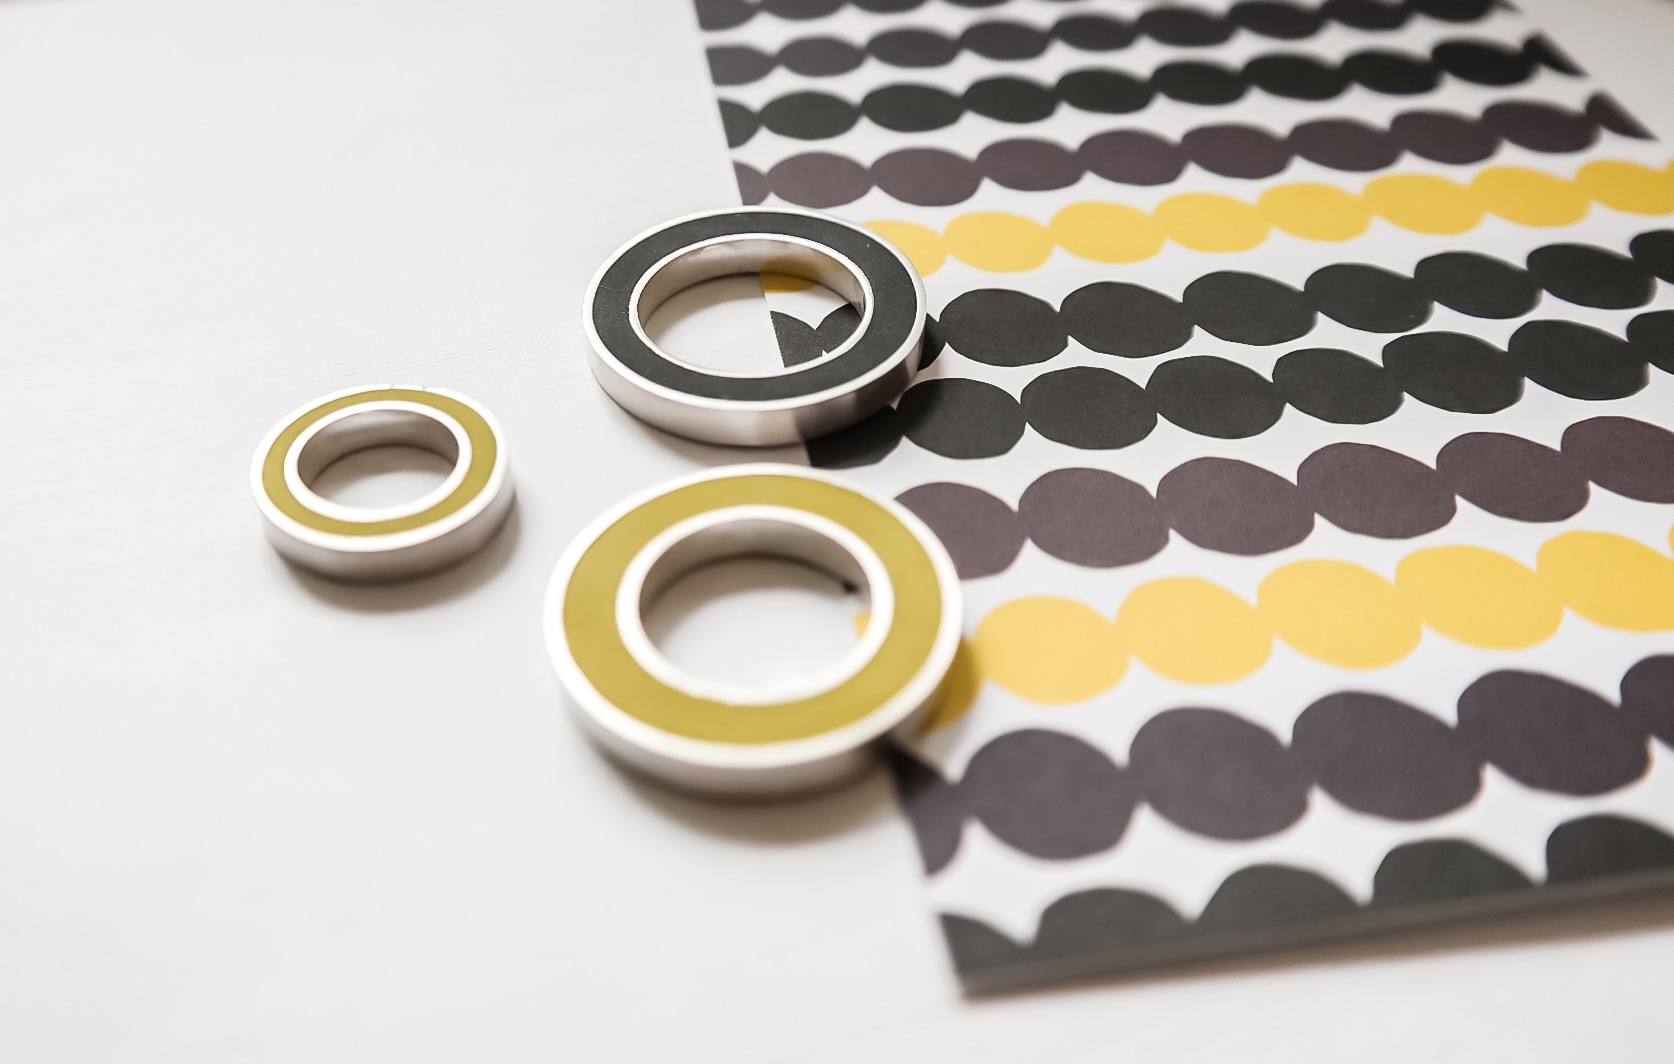 Colour block pendants in yellow and black against an abstract yellow and grey print by Marimekko